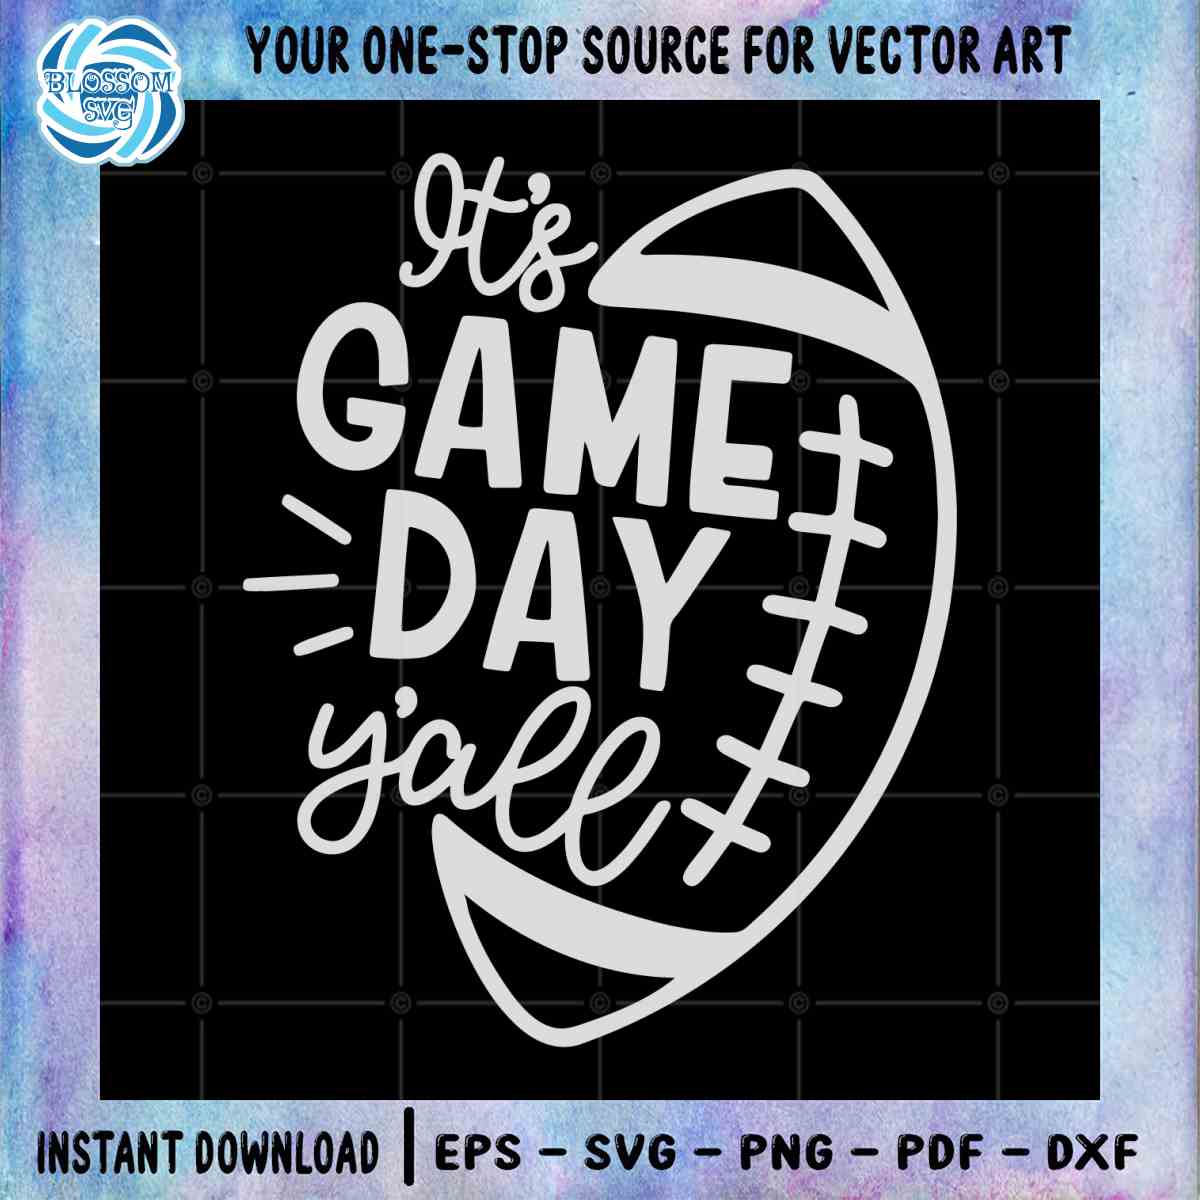 football-player-its-game-day-yall-svg-graphic-design-file